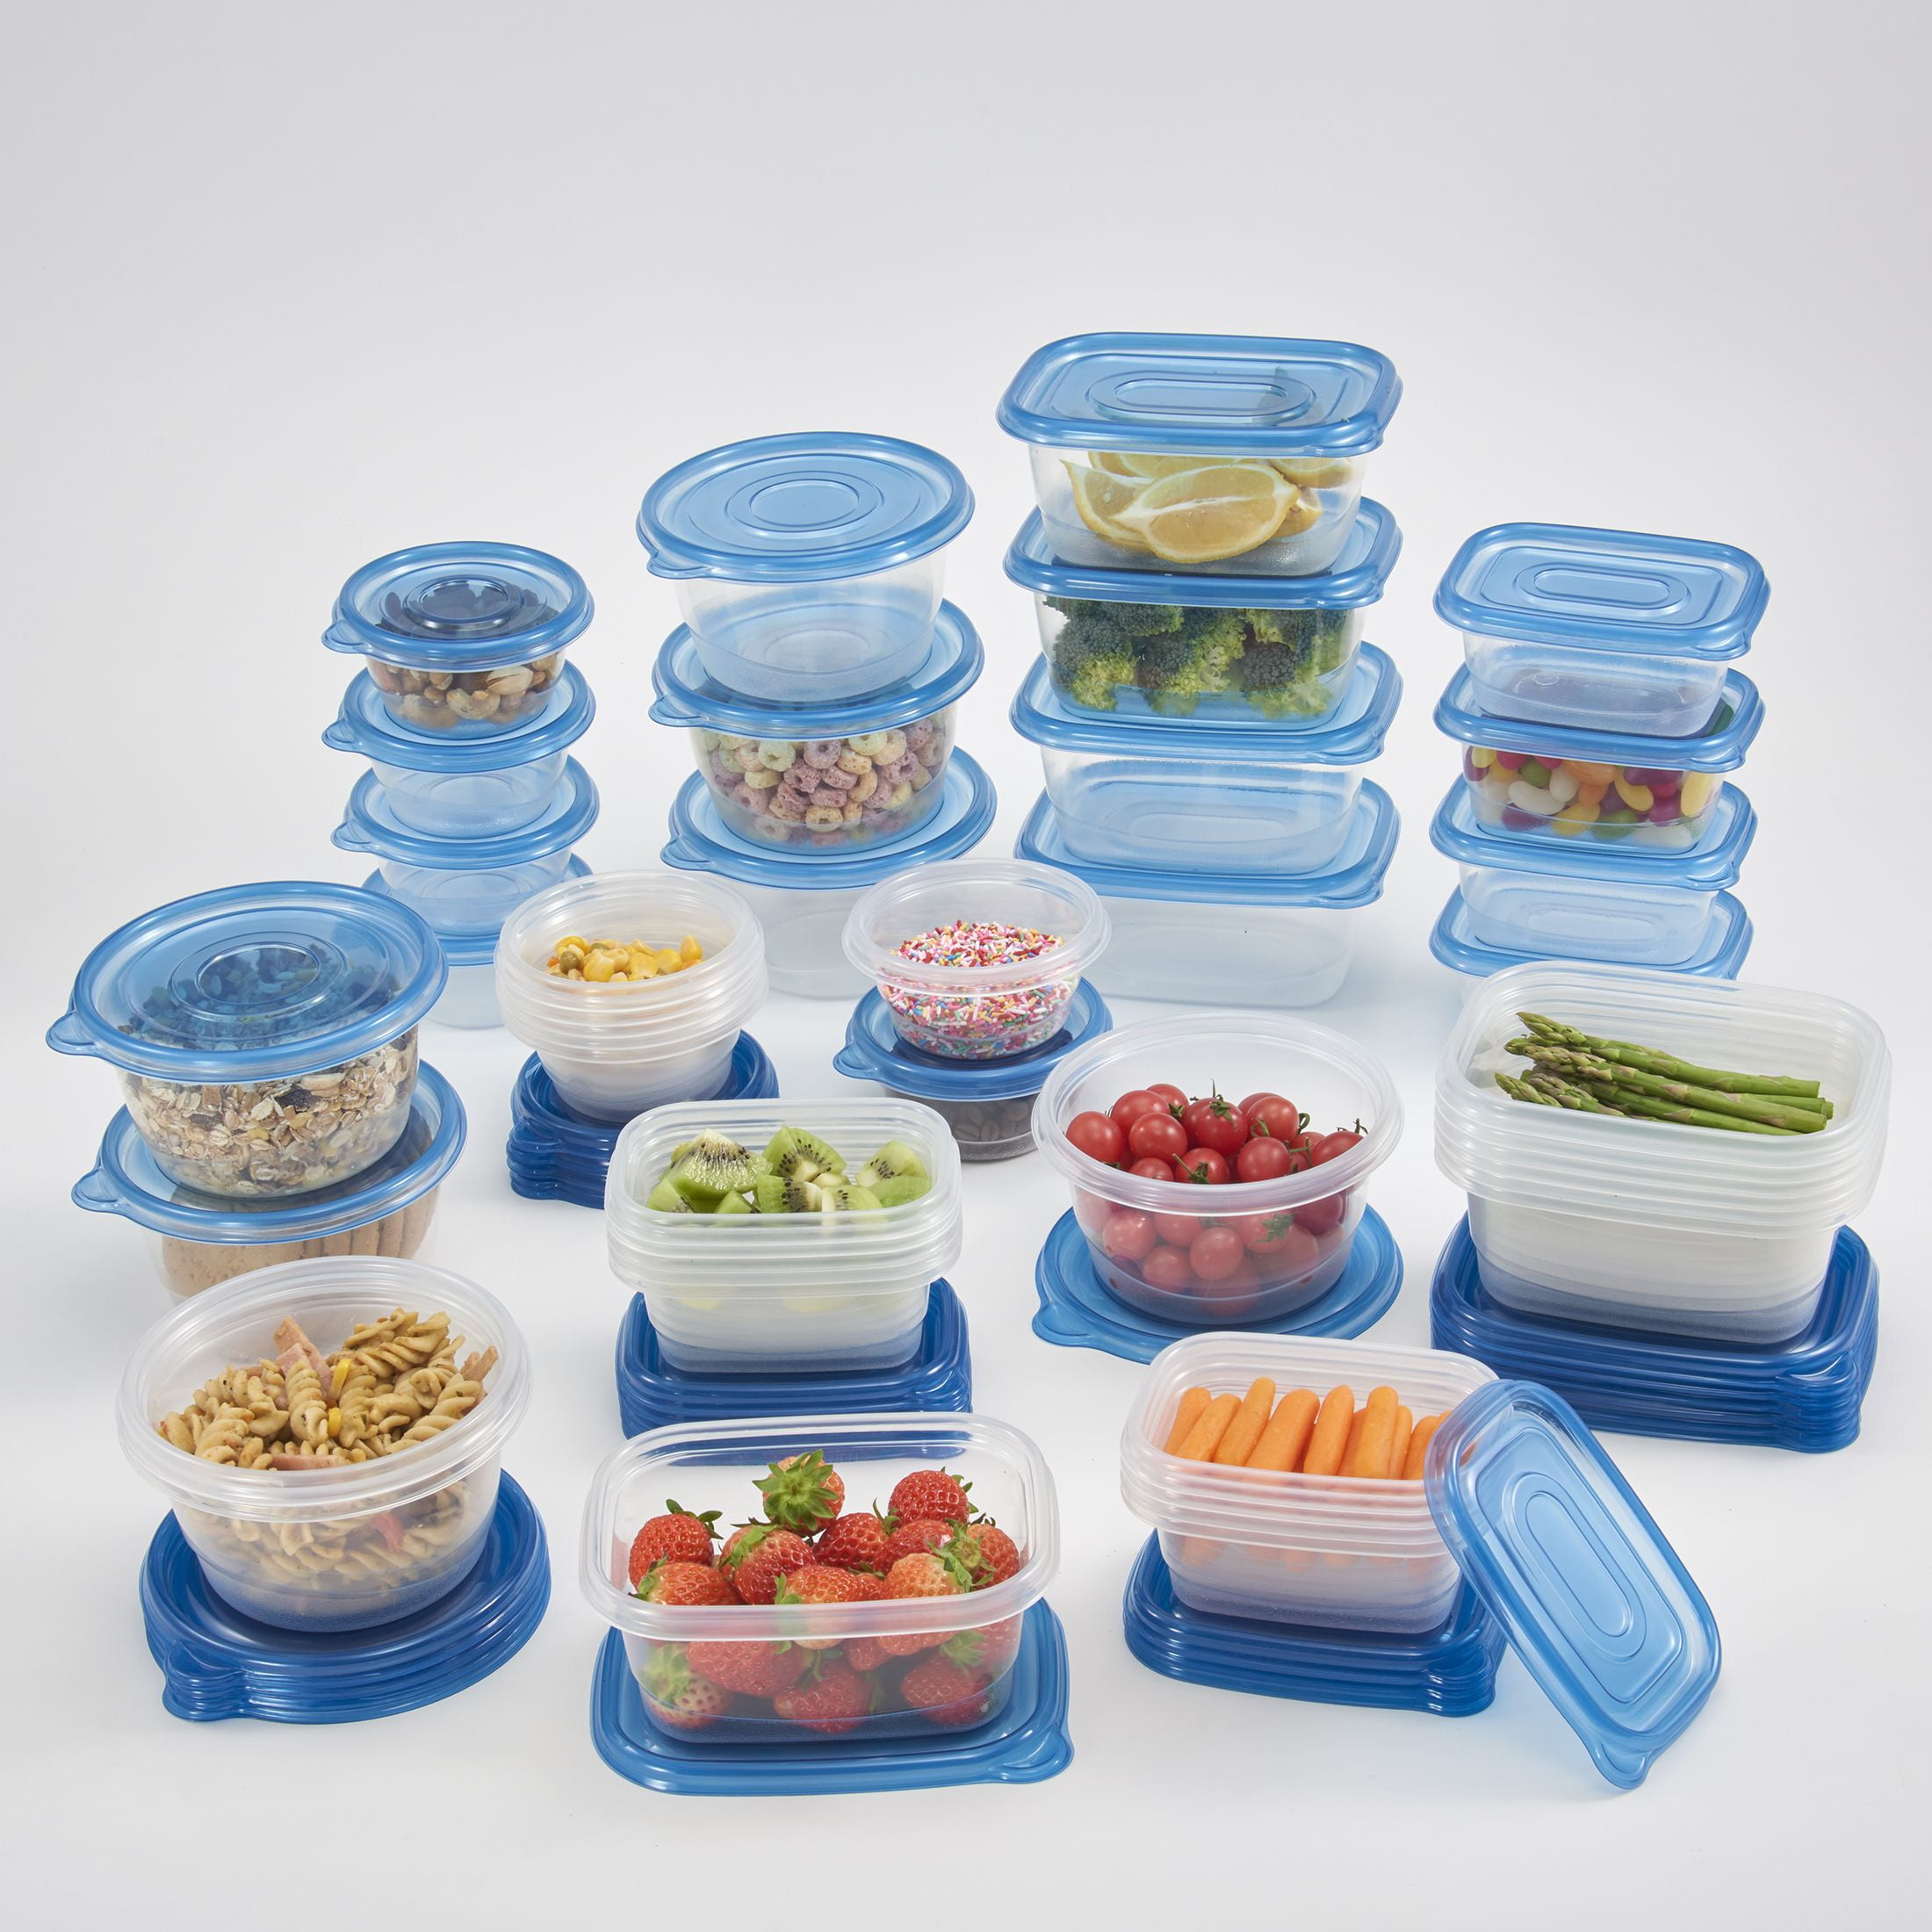 12 PCS Set of Practical Food Storage Unit Container Boxes with Lids Kitchen NEW 